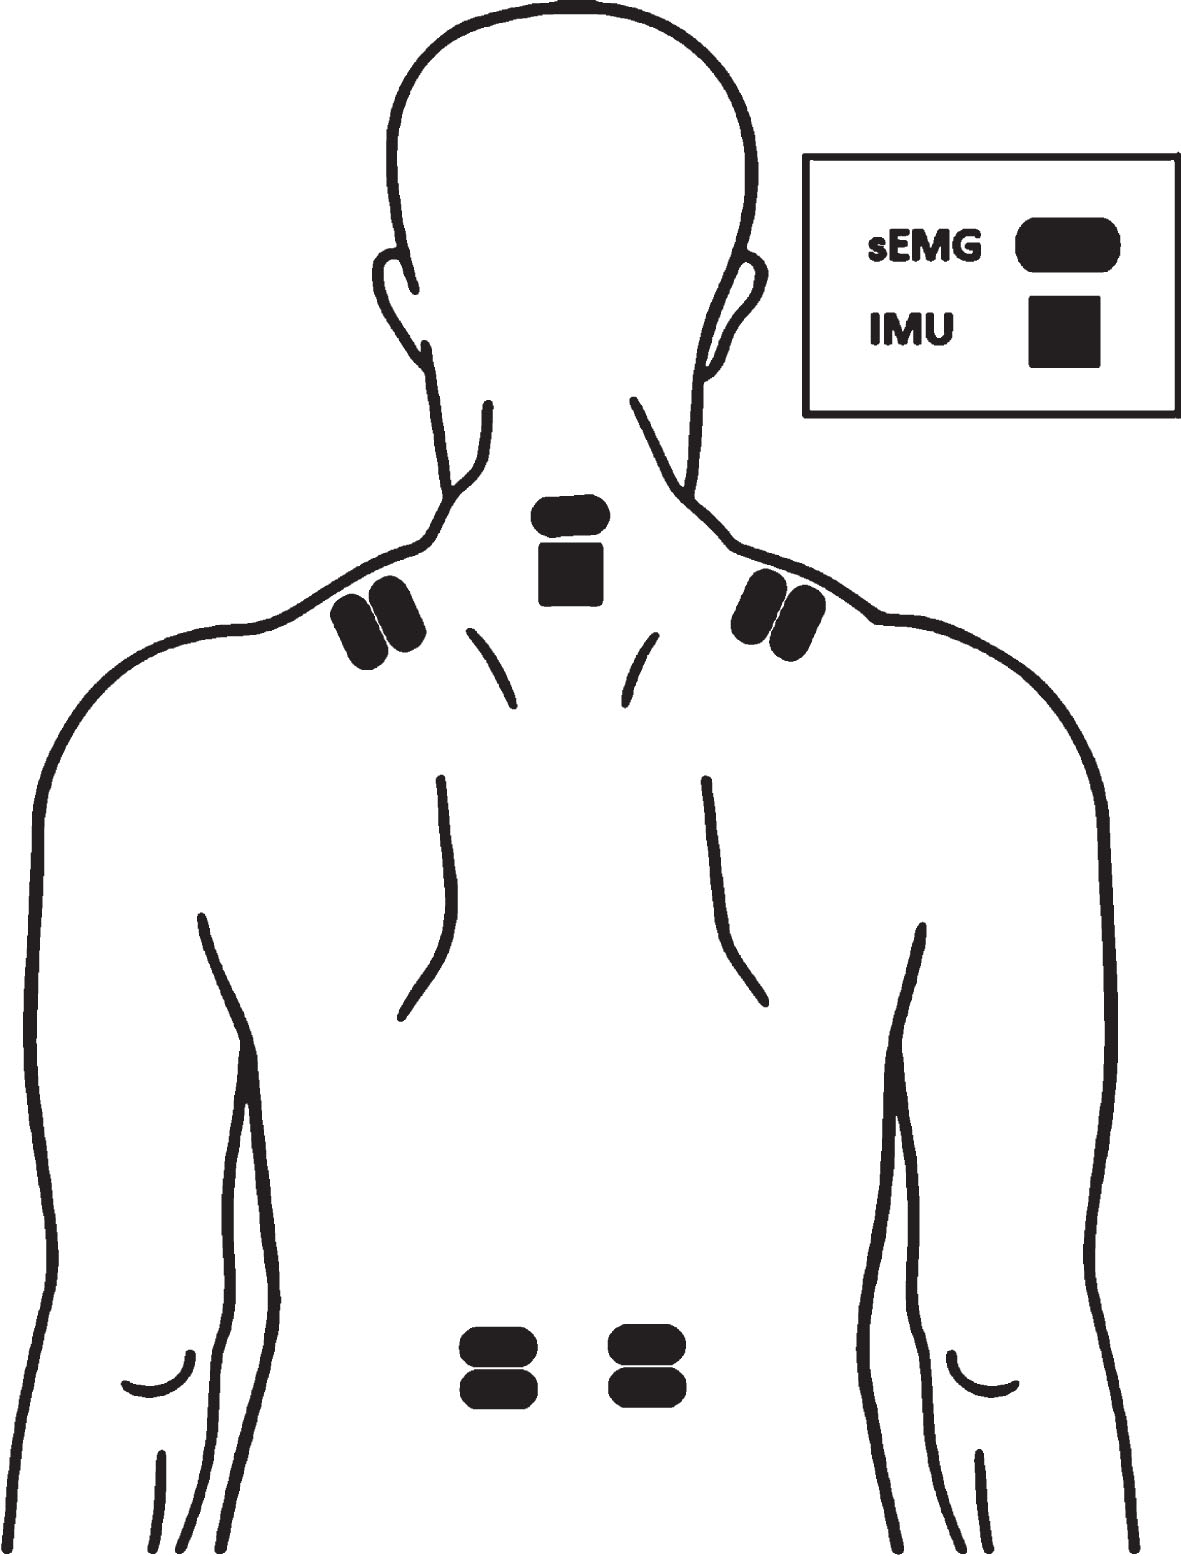 Placement of the surface electromyography (sEMG) electrodes over the dominant and non-dominant upper trapezius and erector spinae muscle and inertial measurement unit (IMU)-sensor. Of note the electrodes above the IMU served as reference electrode.